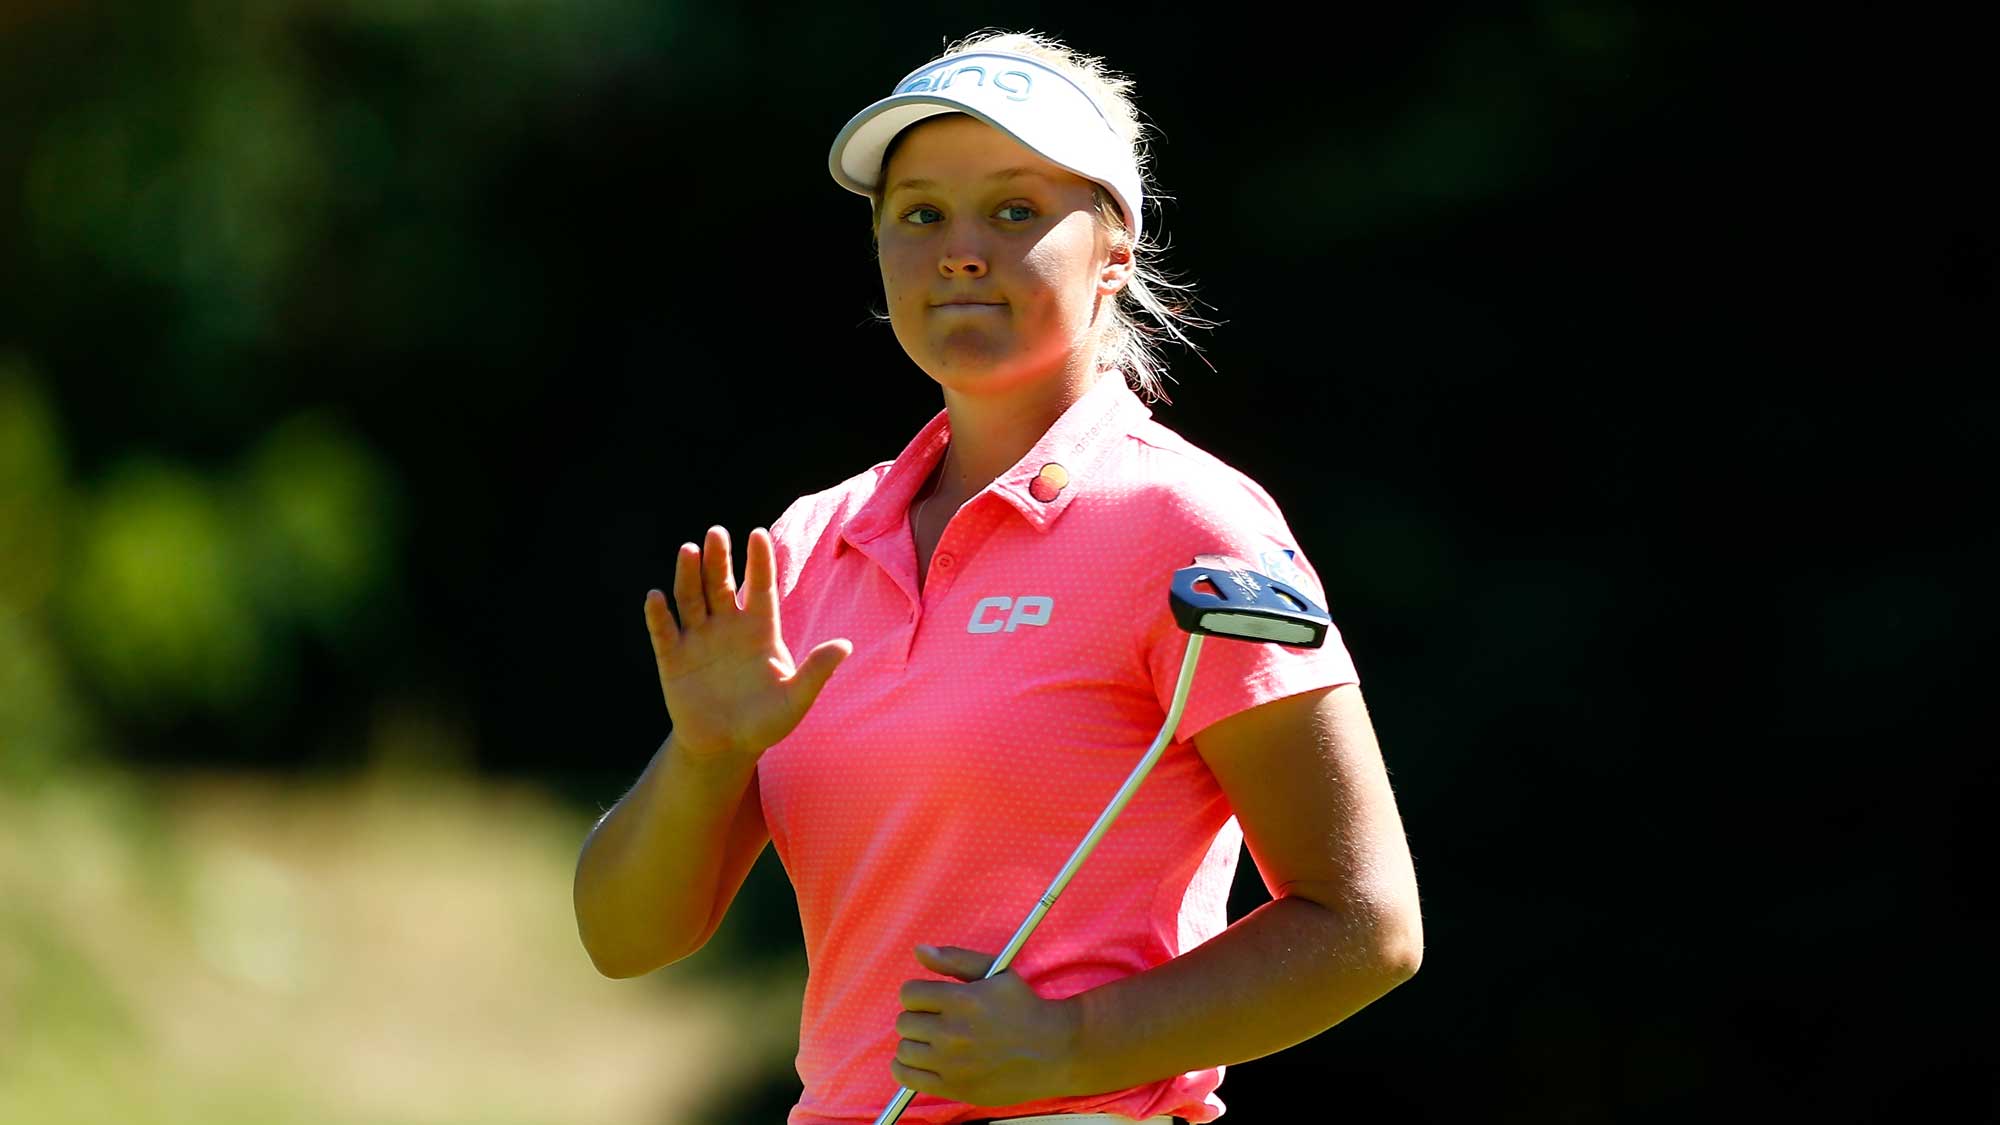 Brooke Henderson of Canada waves to the crowd after making a birdie putt on the 4th hole during the second round of the LPGA Cambia Portland Classic 